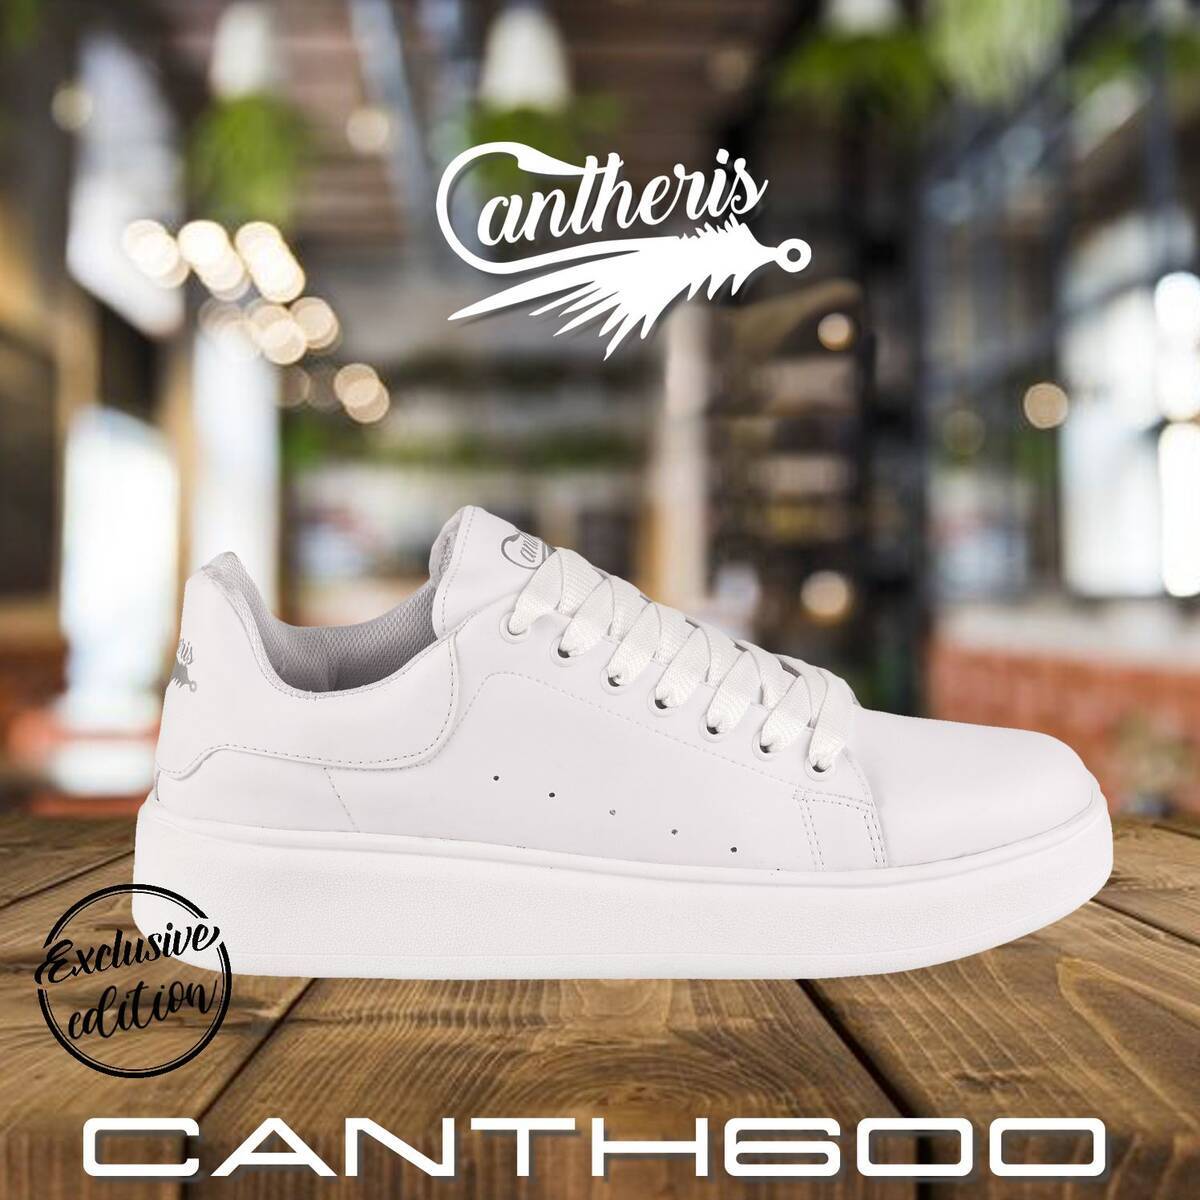 Imagen producto CANTH600 BLANCO BASE BLANCA 5